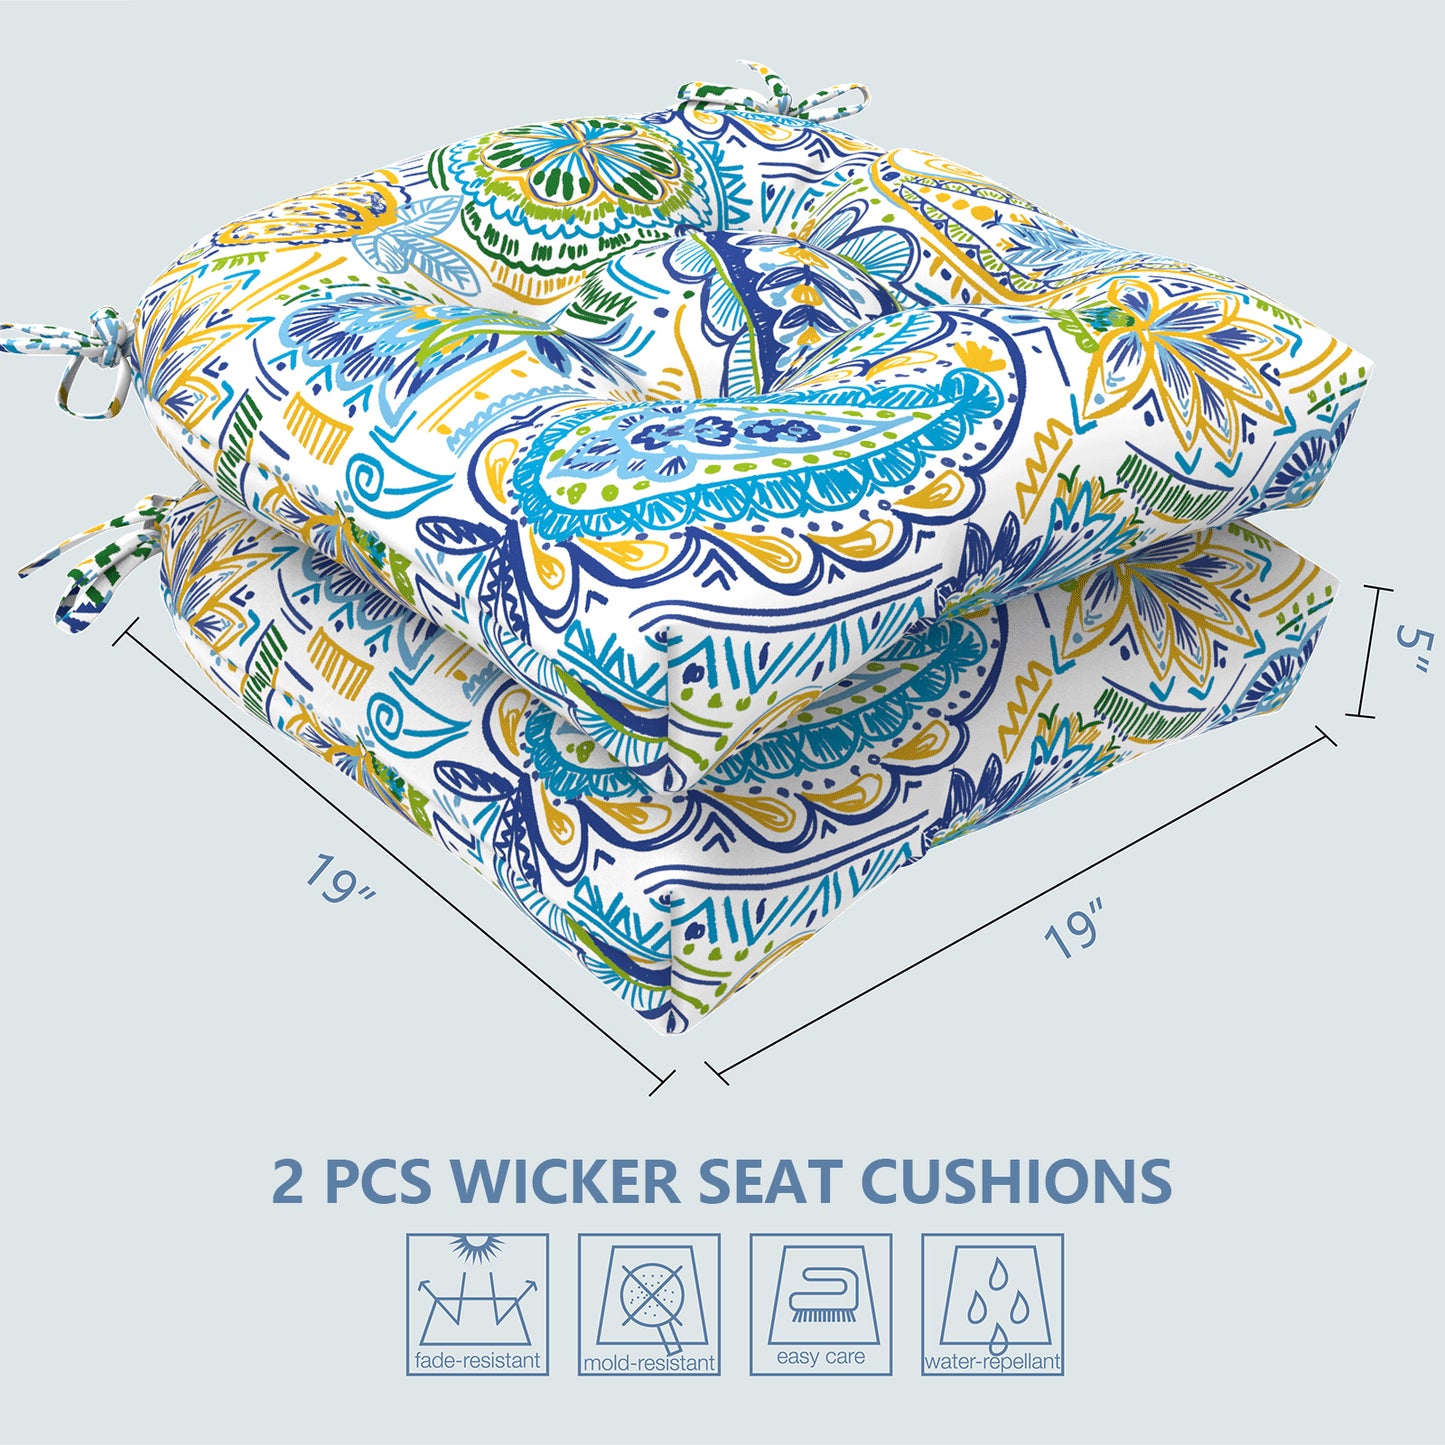 Melody Elephant Patio Wicker Chair Cushions, All Weather Outdoor Tufted Chair Pads Pack of 2, 19 x 19 x 5 Inch U-Shaped Seat Cushions of Garden Furniture Decoration, Blue Paisley